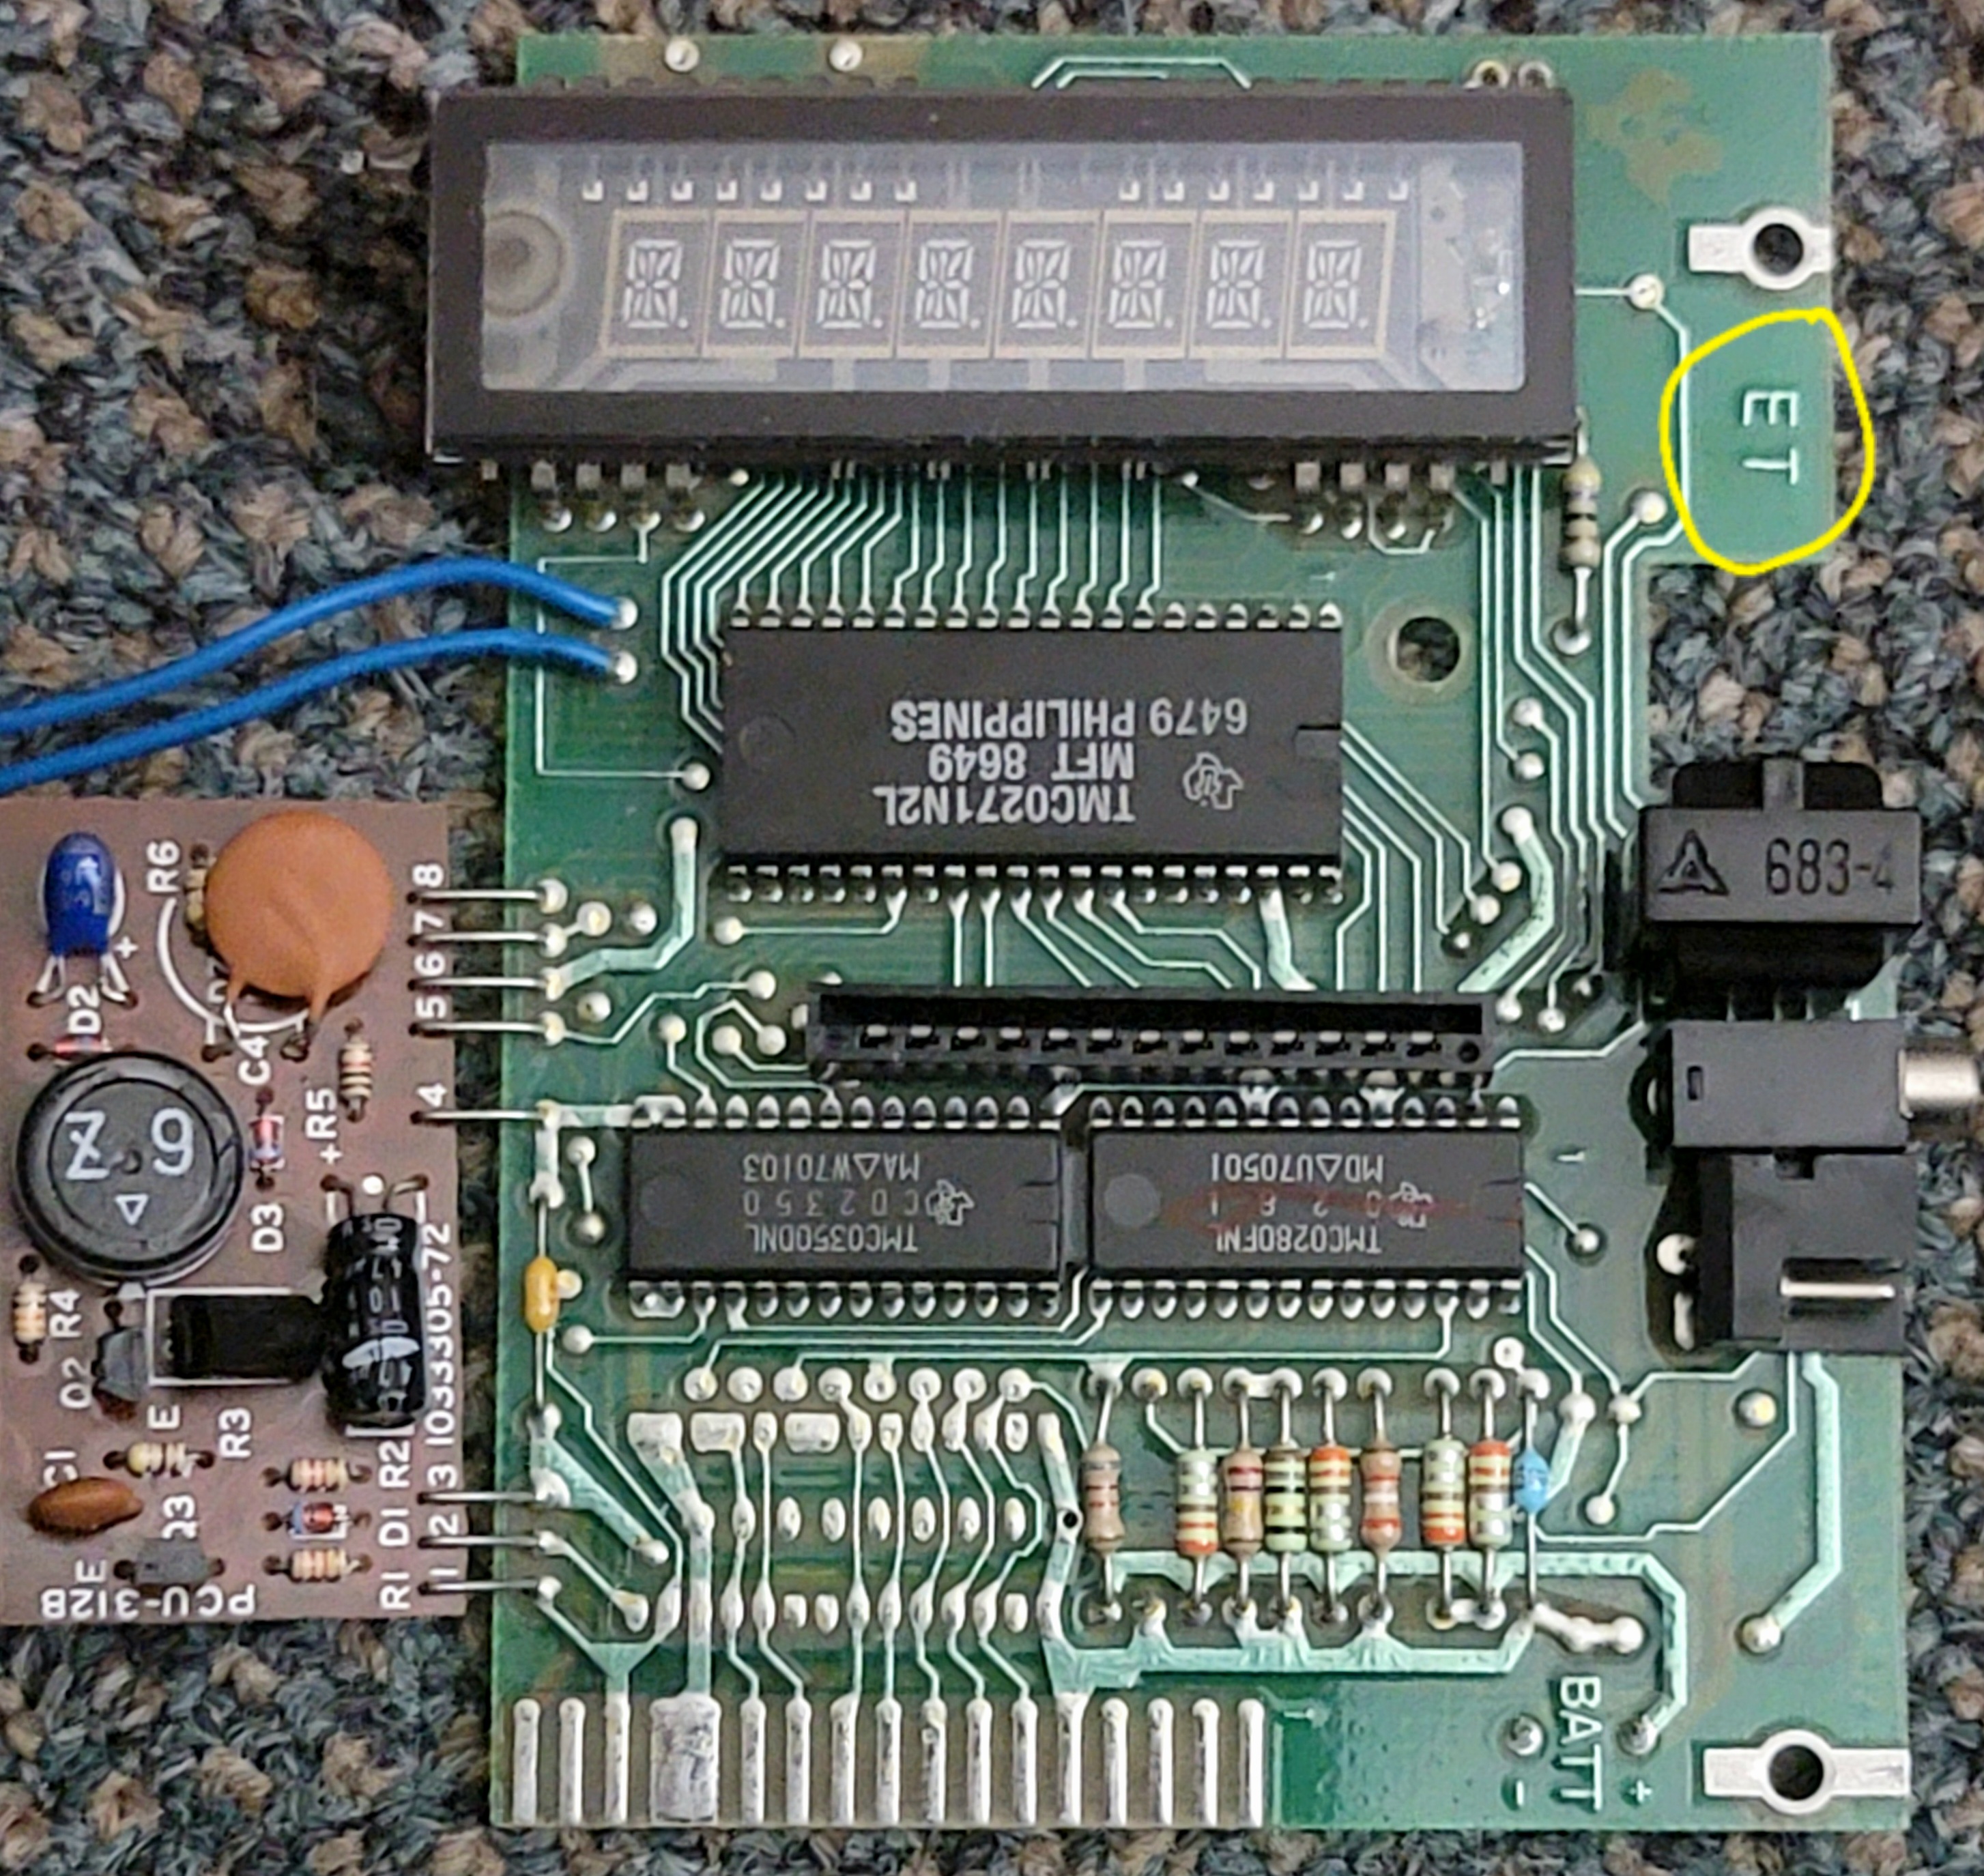 The inside of a second generation Speak & Spell